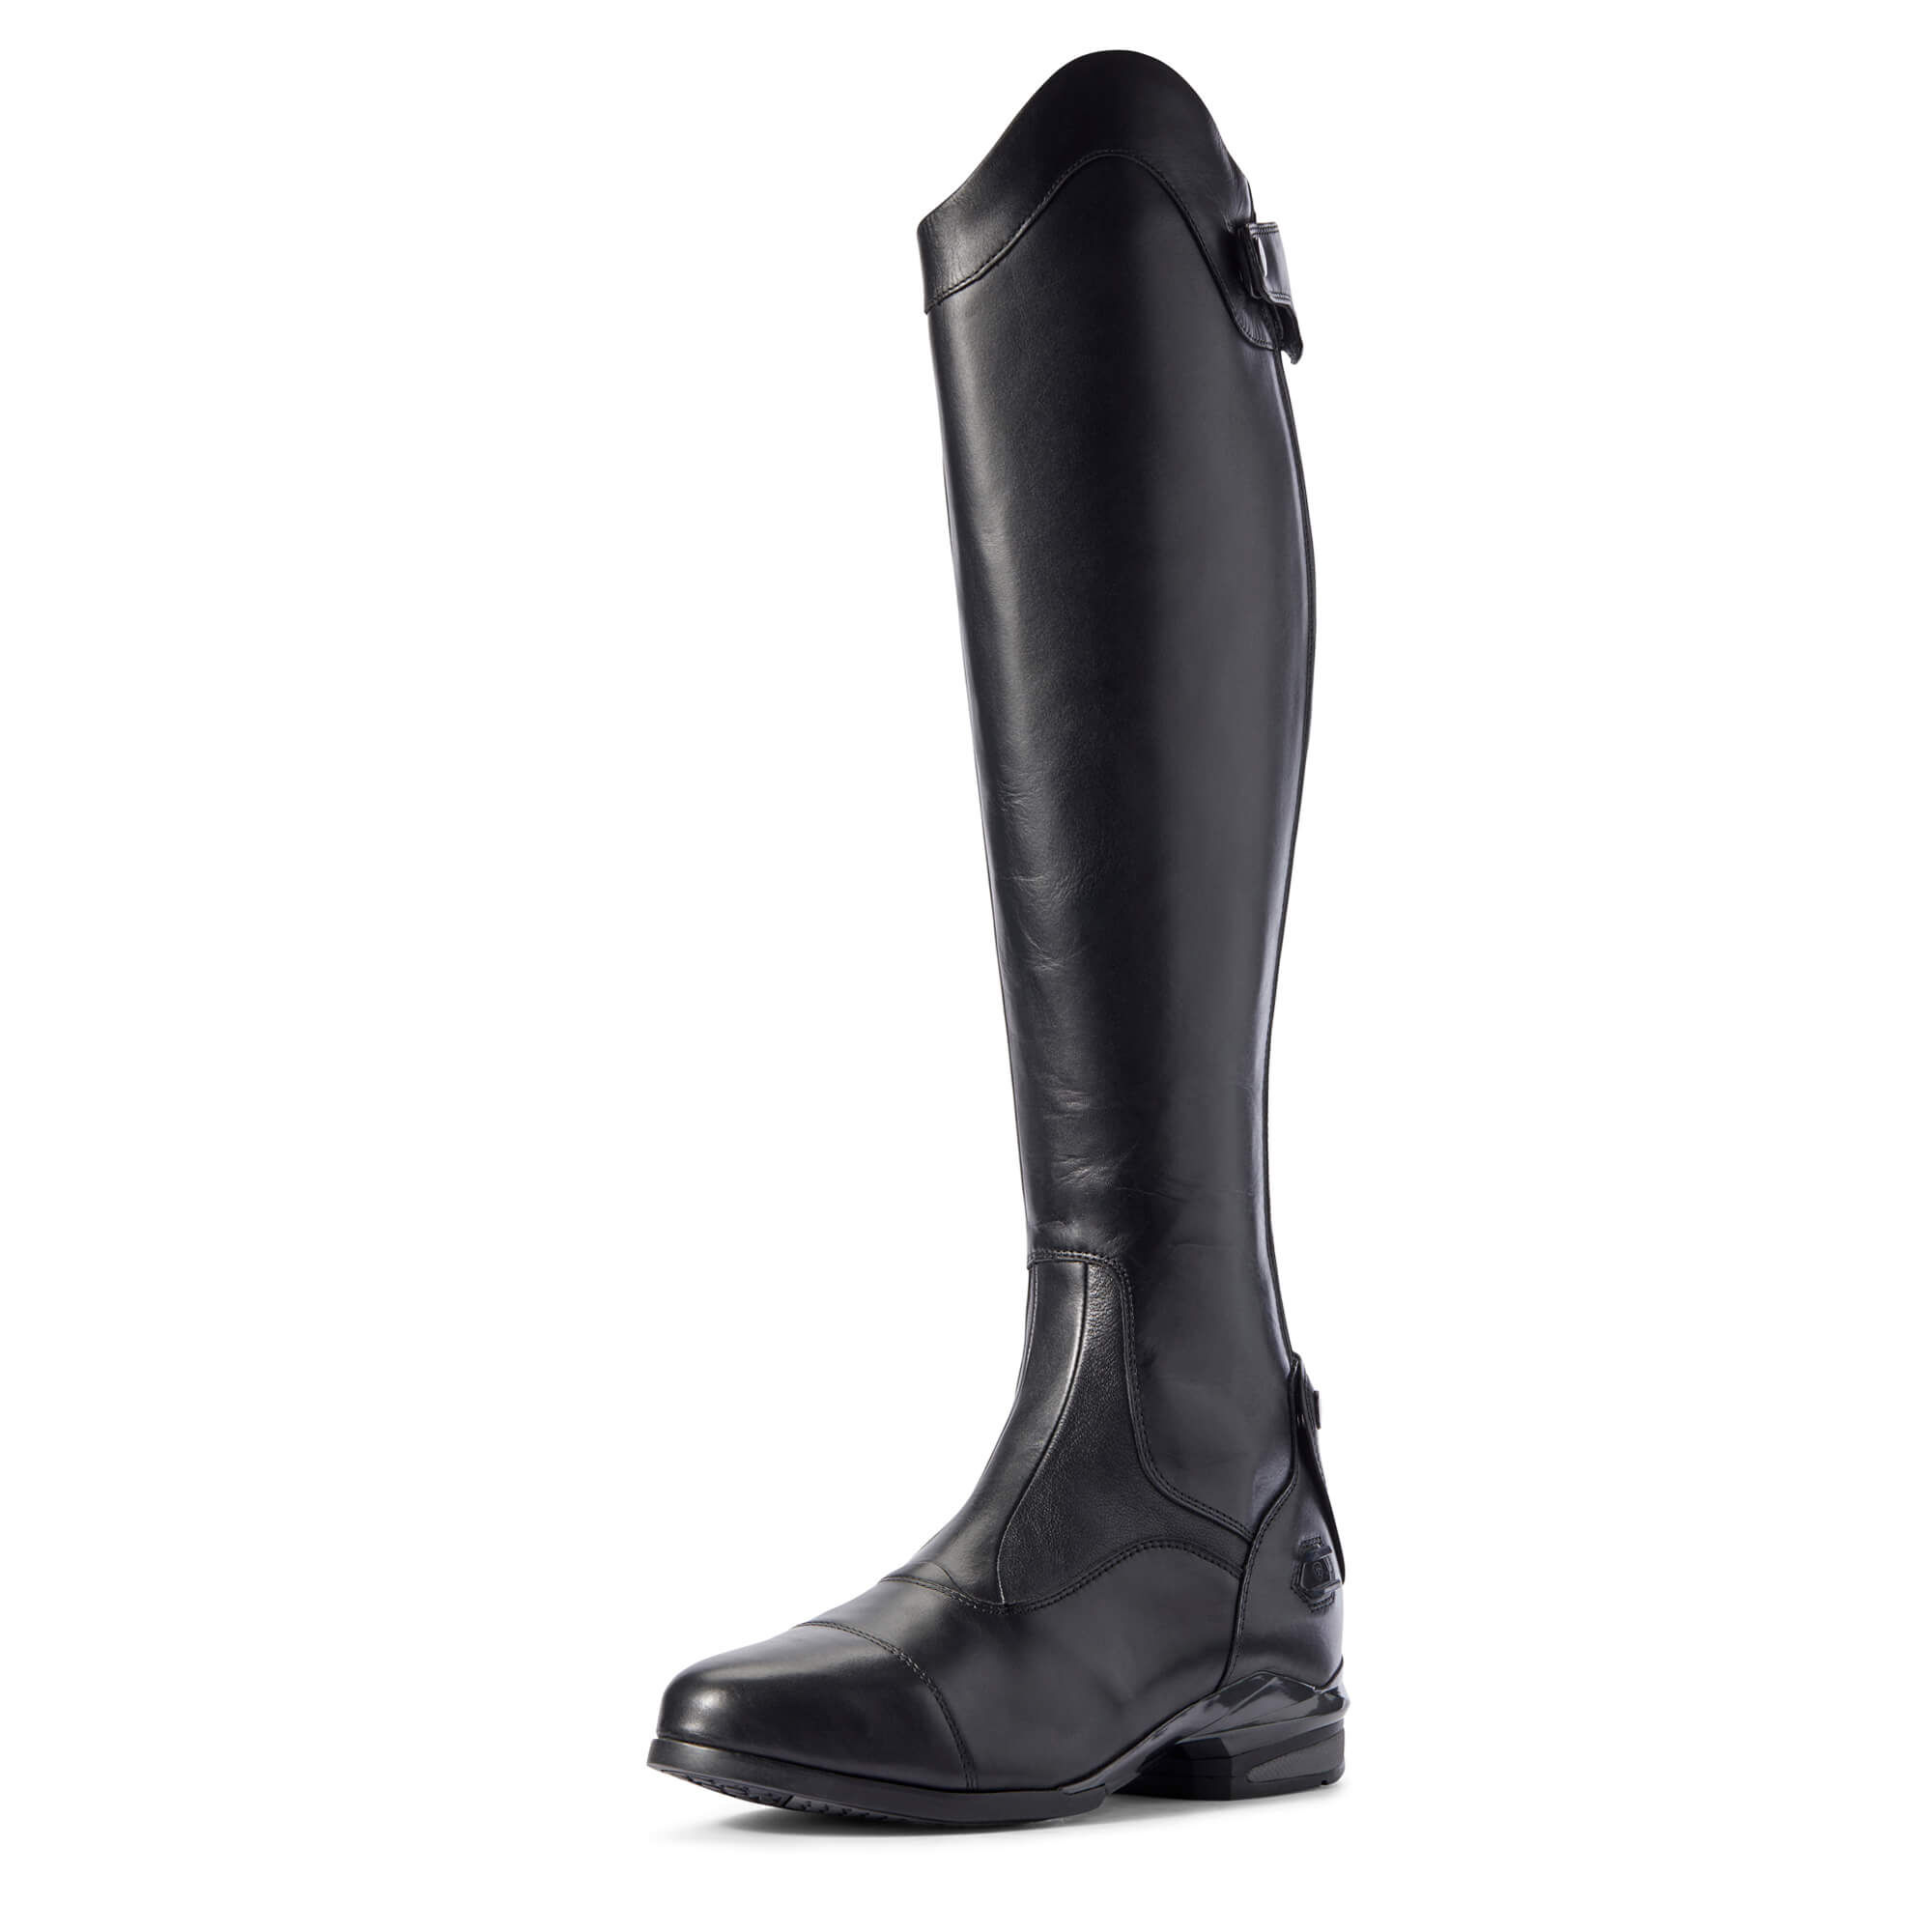 tall riding boots for men